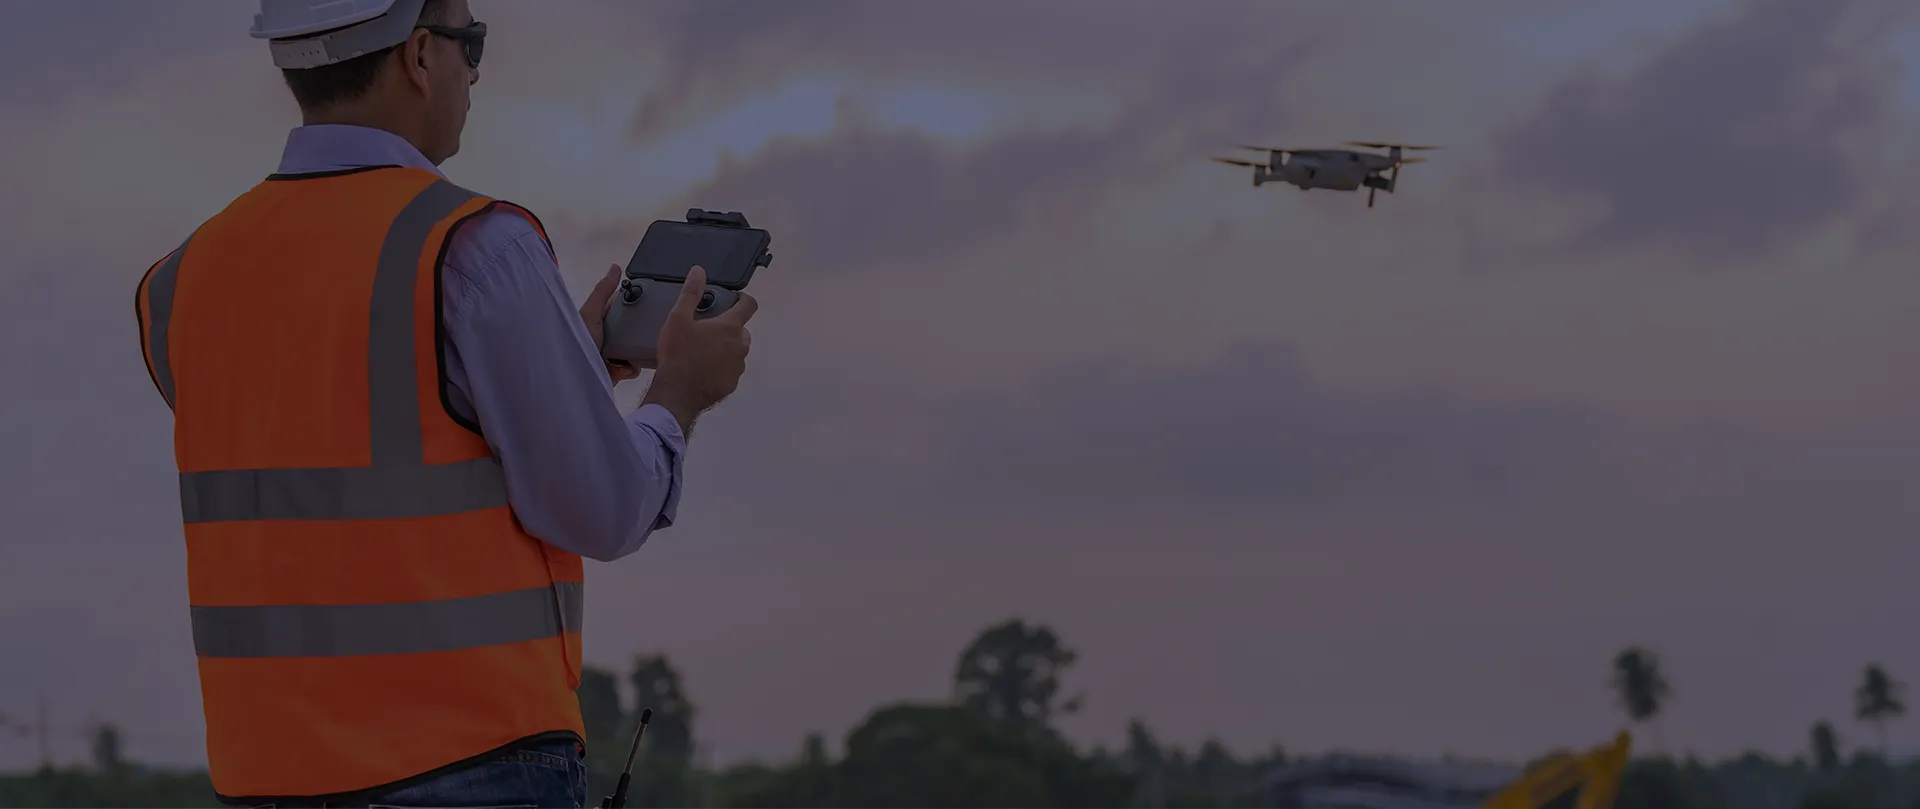 construction worker flying a drone on job site